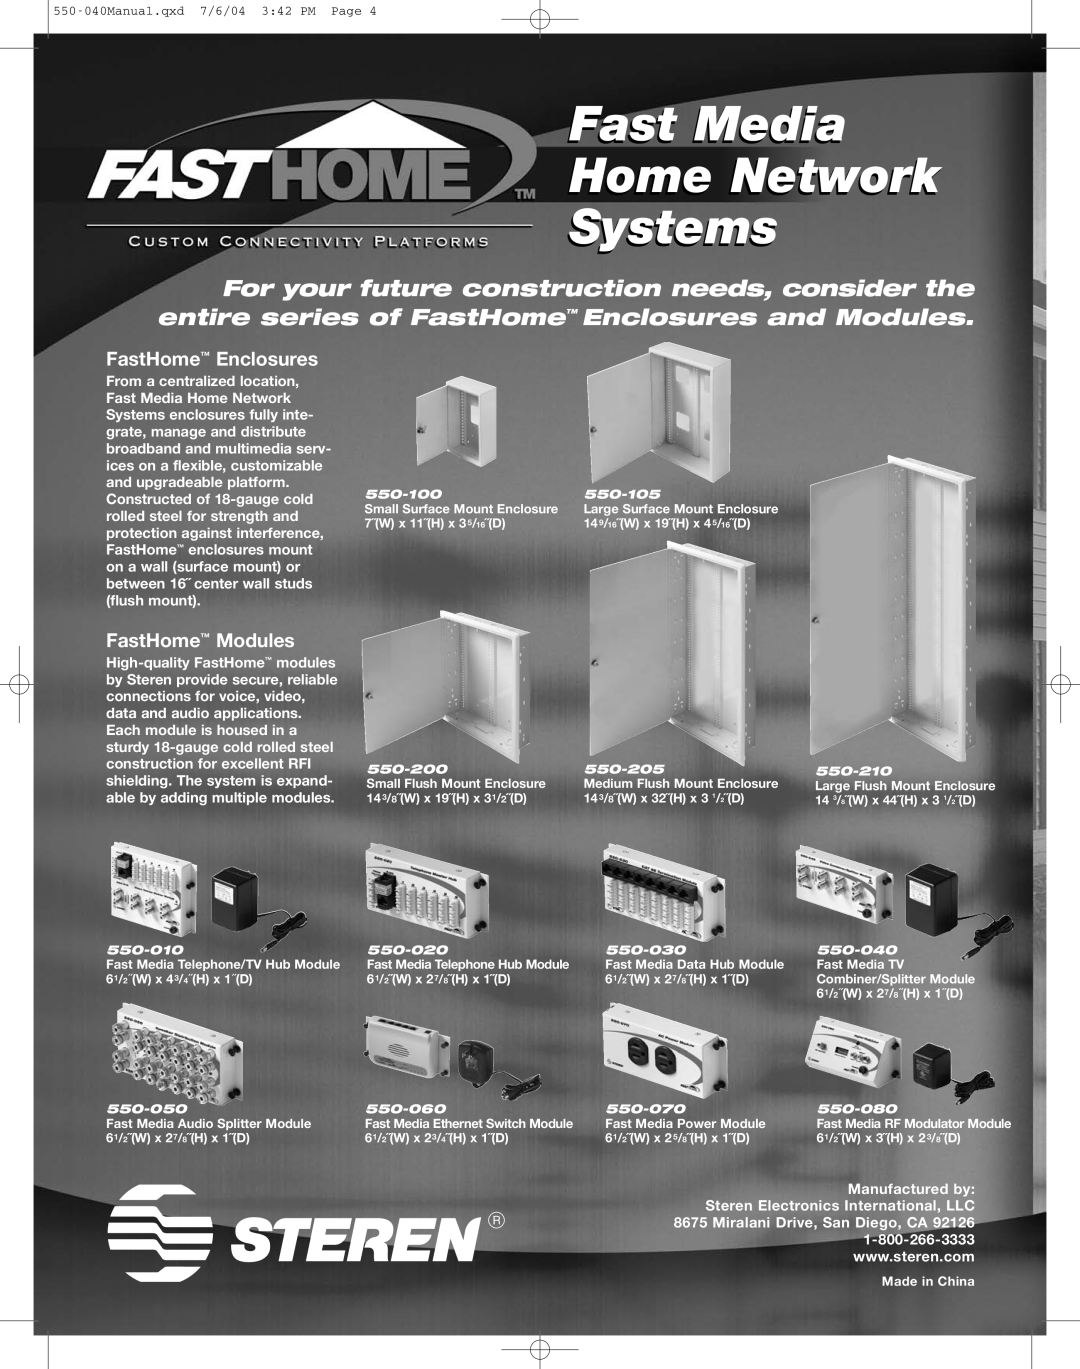 Steren 550-040 manual Fast Media Home Network Systems, FastHome Enclosures, FastHome Modules 